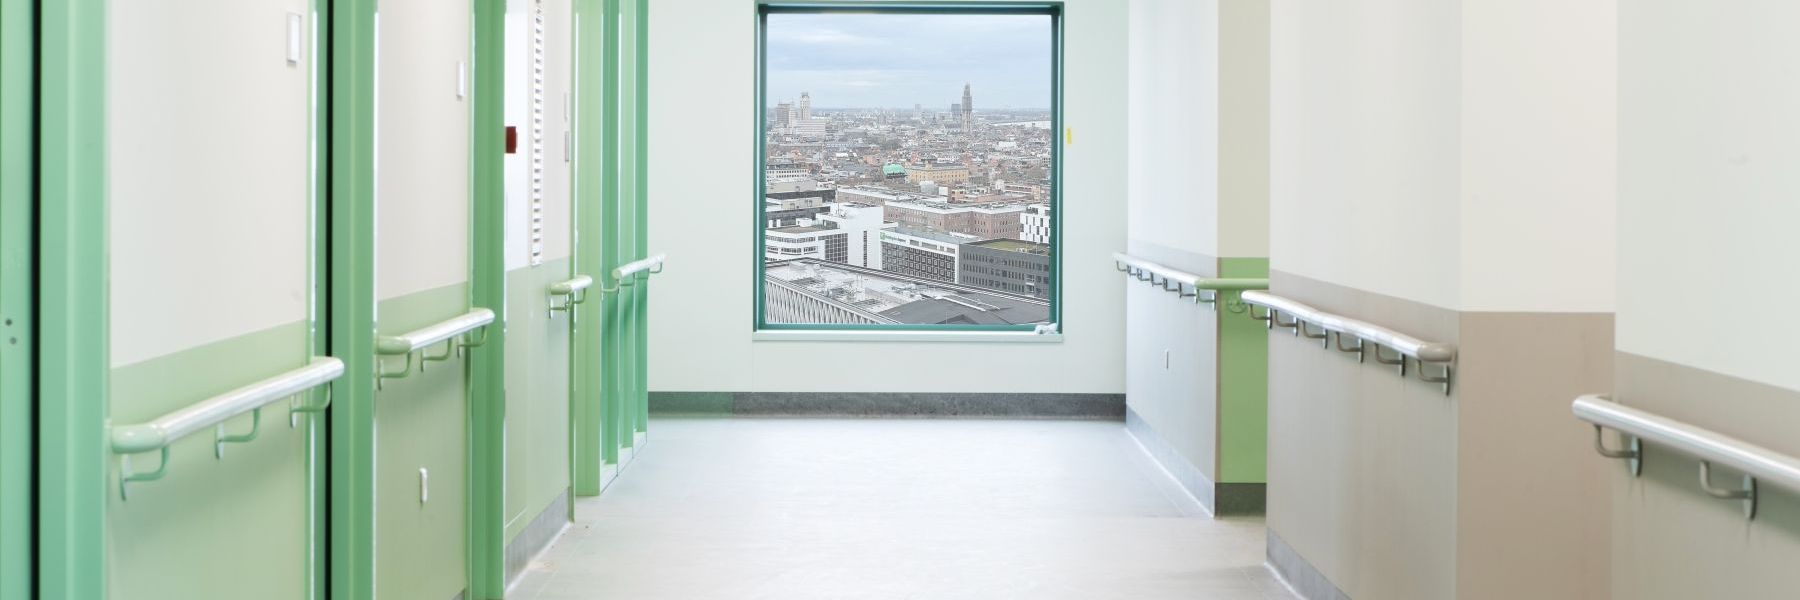 LEXAN™ CLINIWALL™ SHEET CADIX hospital with view-uitsnede